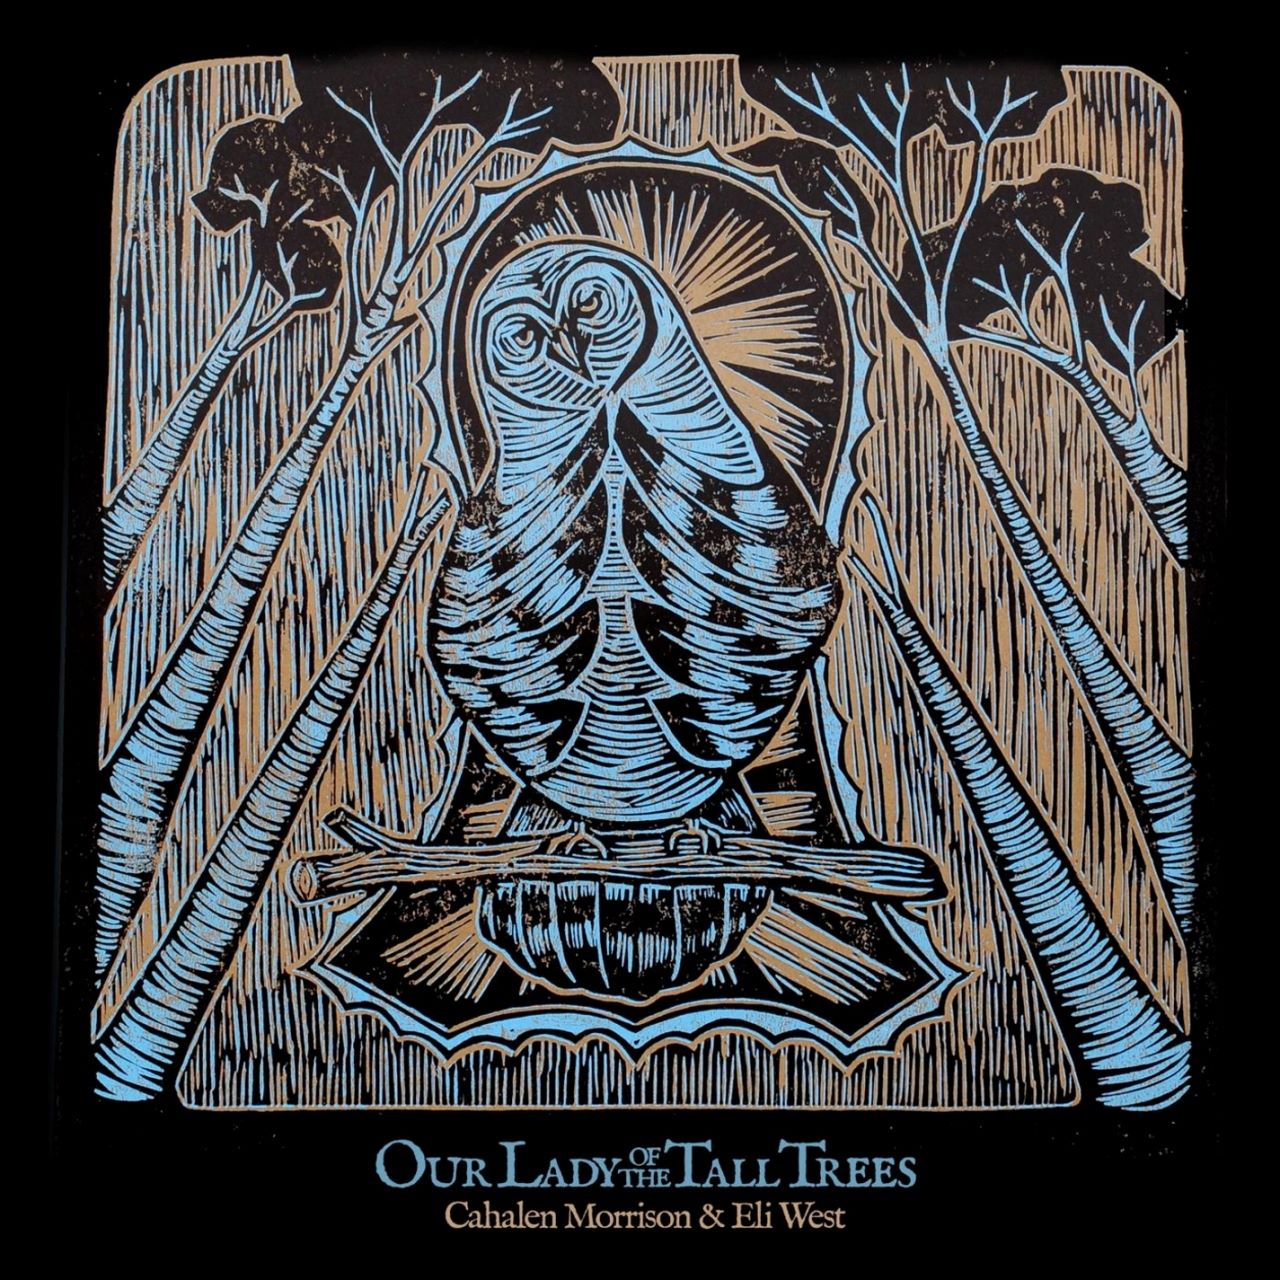 Cahalen Morrison & Eli West - Our Lady Of The Tall Trees cover album